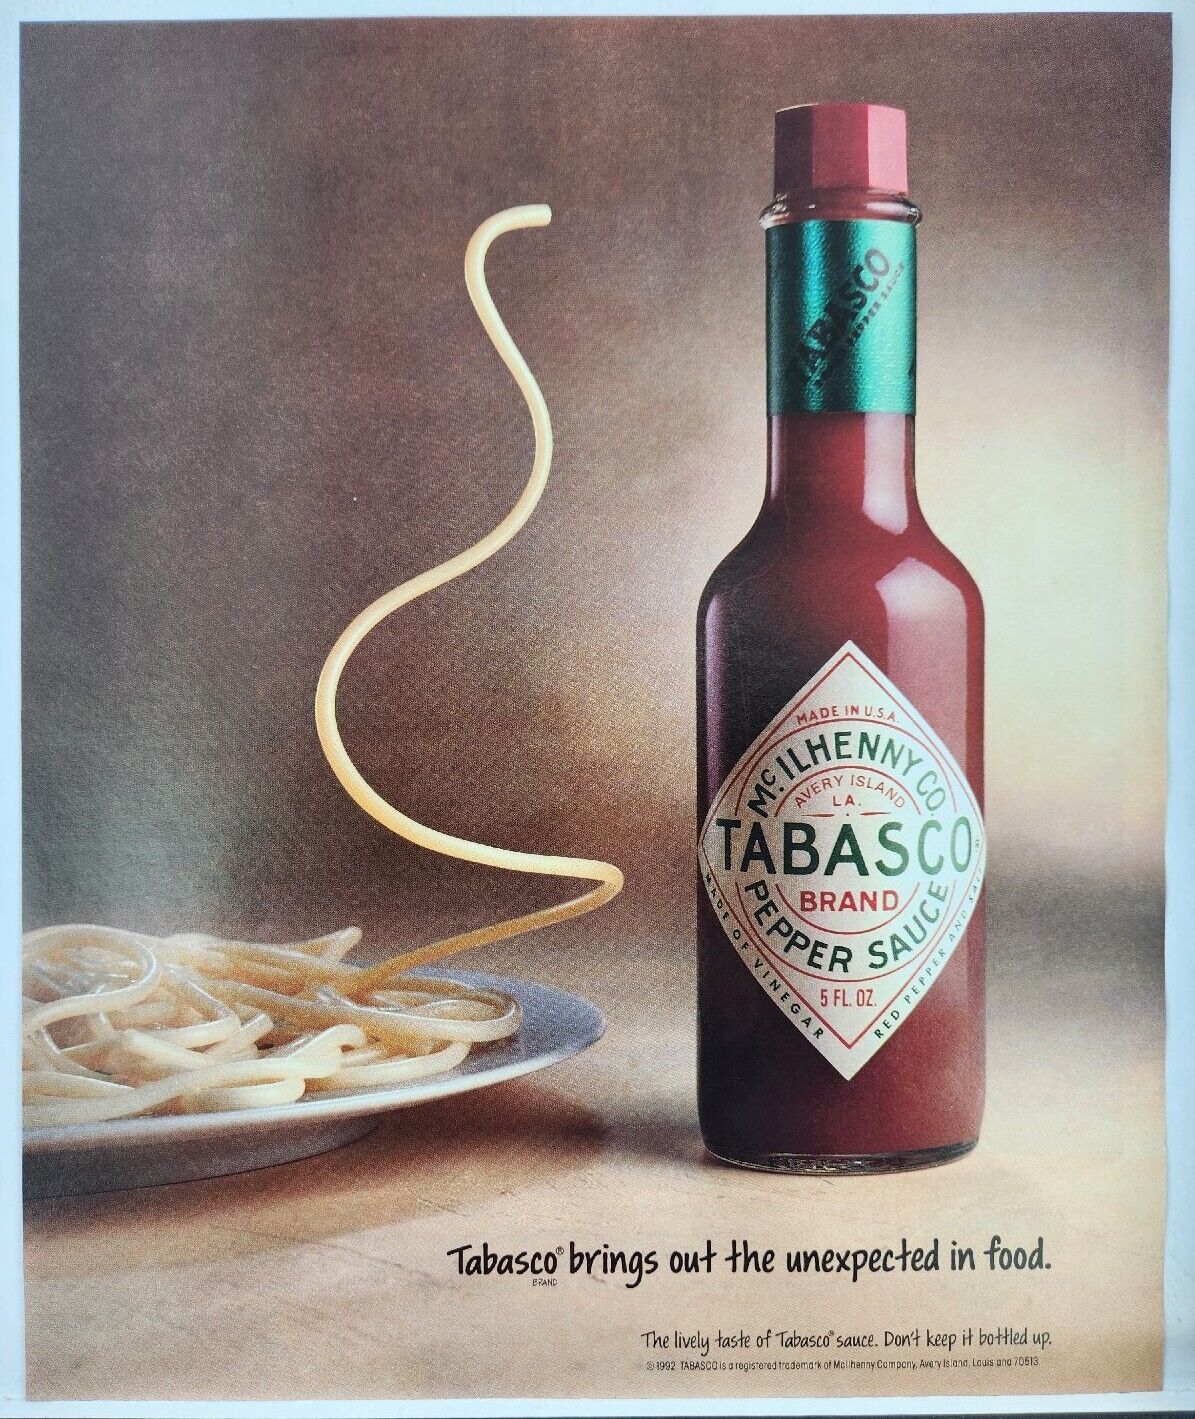 1992 Tabasco Hot Pepper Sauce McIlhenny Co Brings Out The... Poster Print Ad